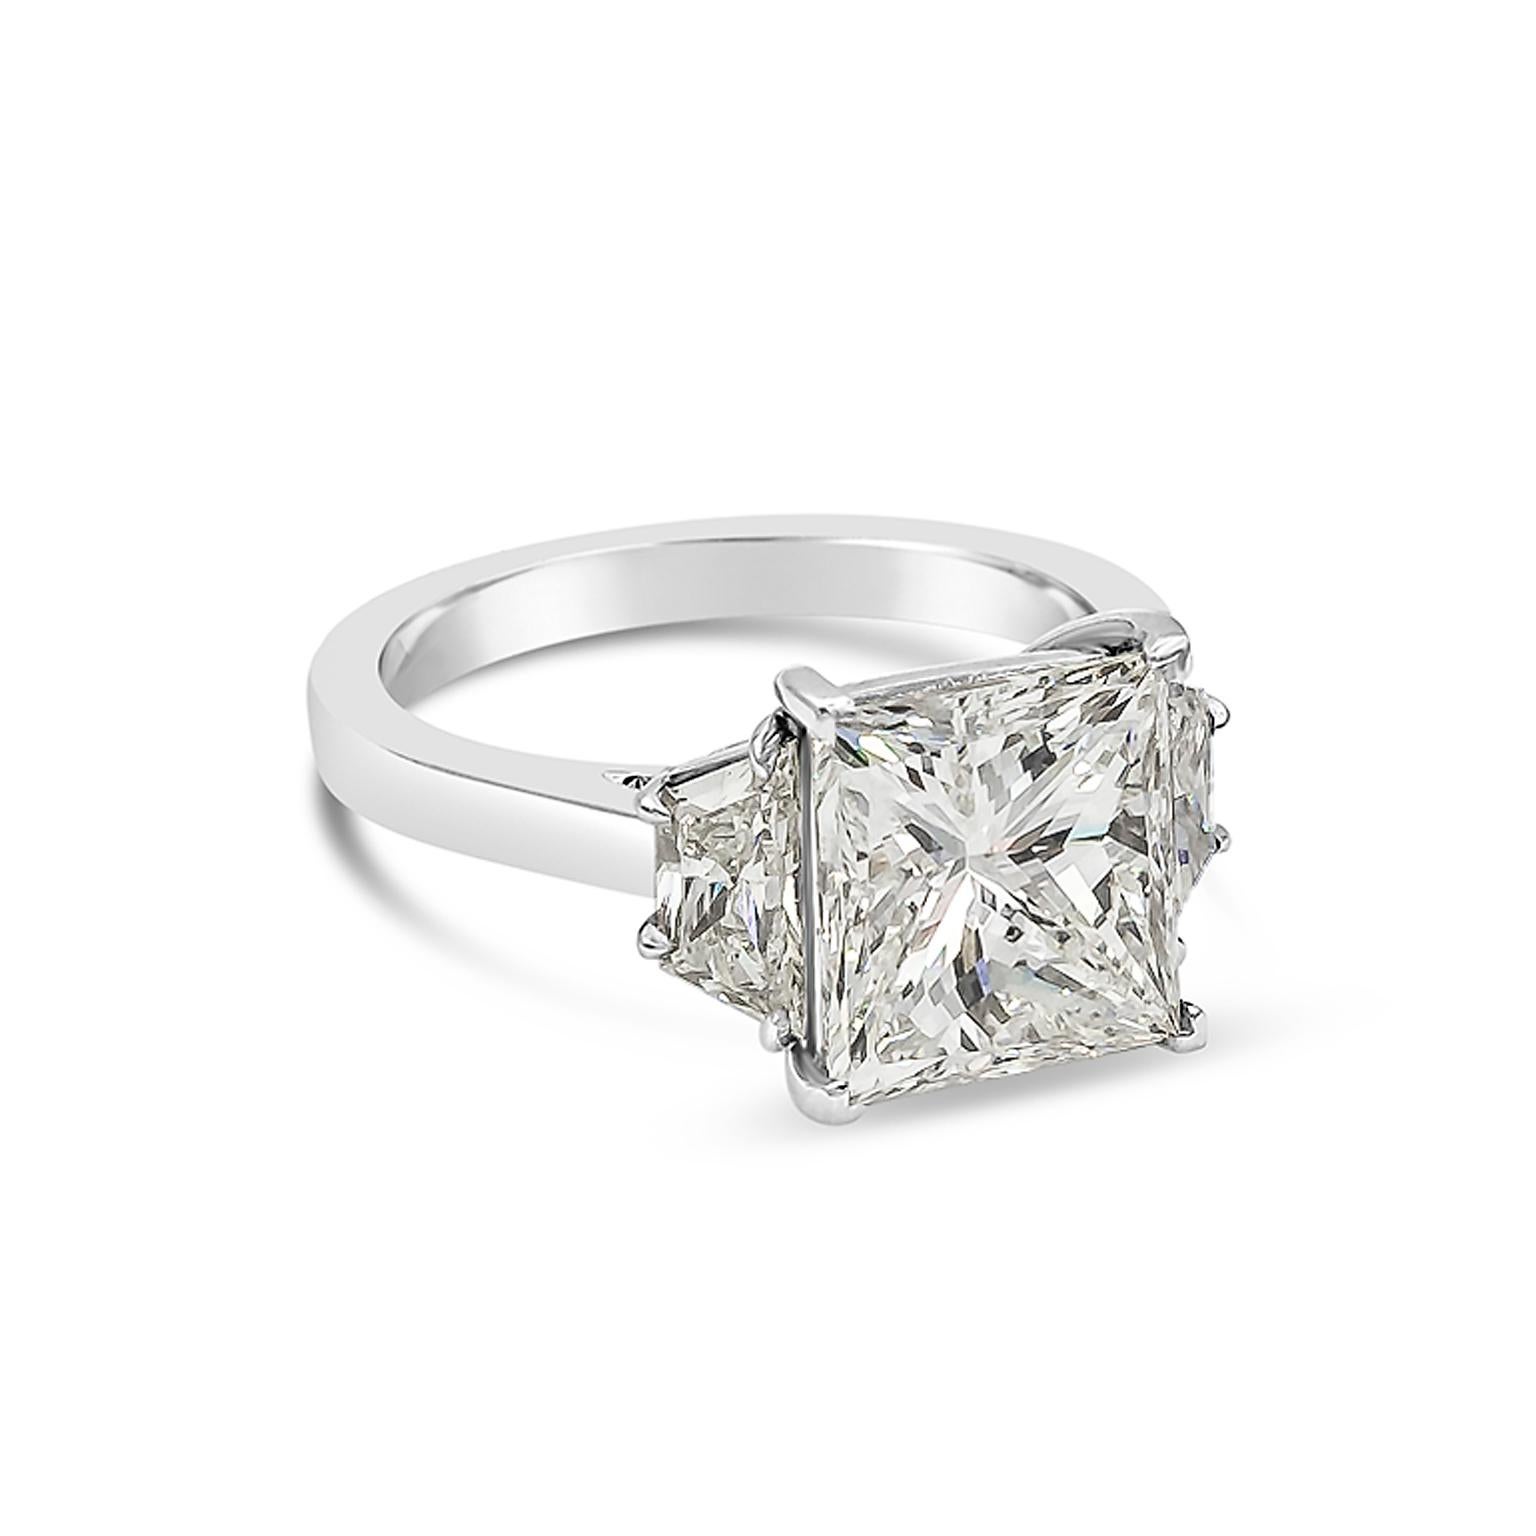 a classic engagement ring style showcasing a 4.03 carat princess cut diamond certified by GIA as J color, SI1 clarity. Flanking the center stone are brilliant trapezoid diamonds weighing 0.95 carats total. Set in a polished platinum mounting. Size